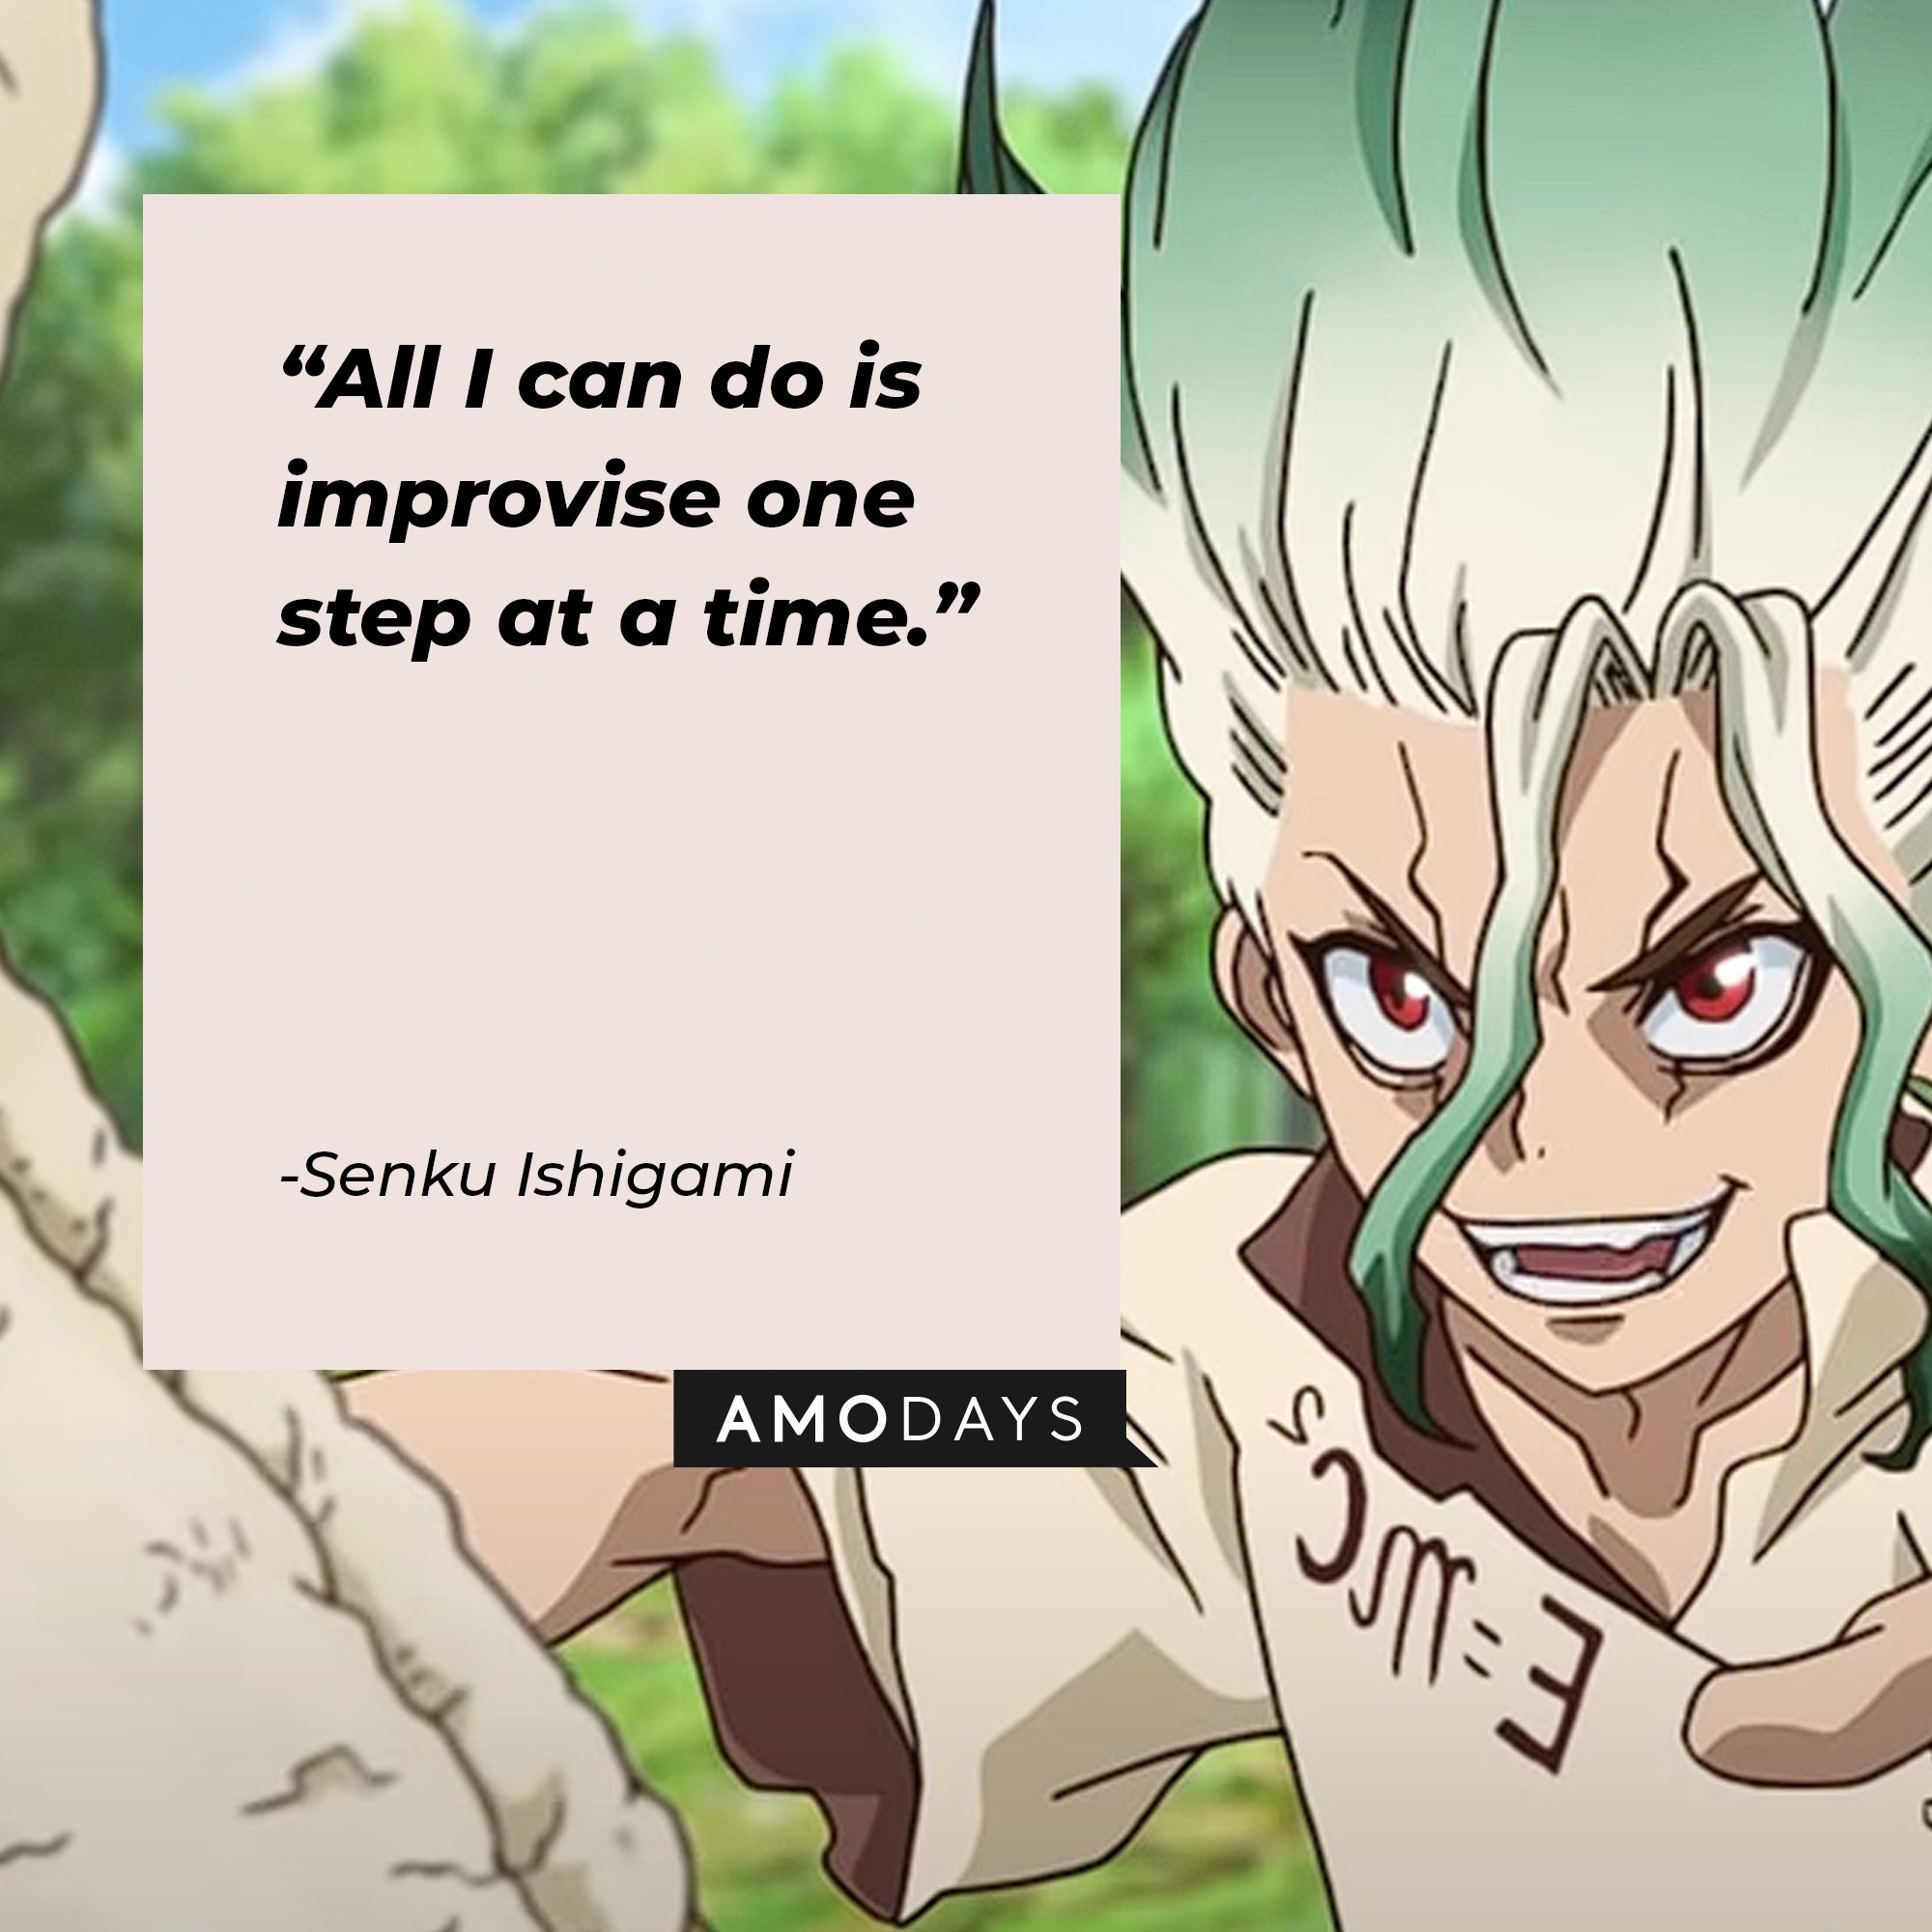 Senku Ishigami’s quote: "All I can do is improvise one step at a time." | Image: AmoDays